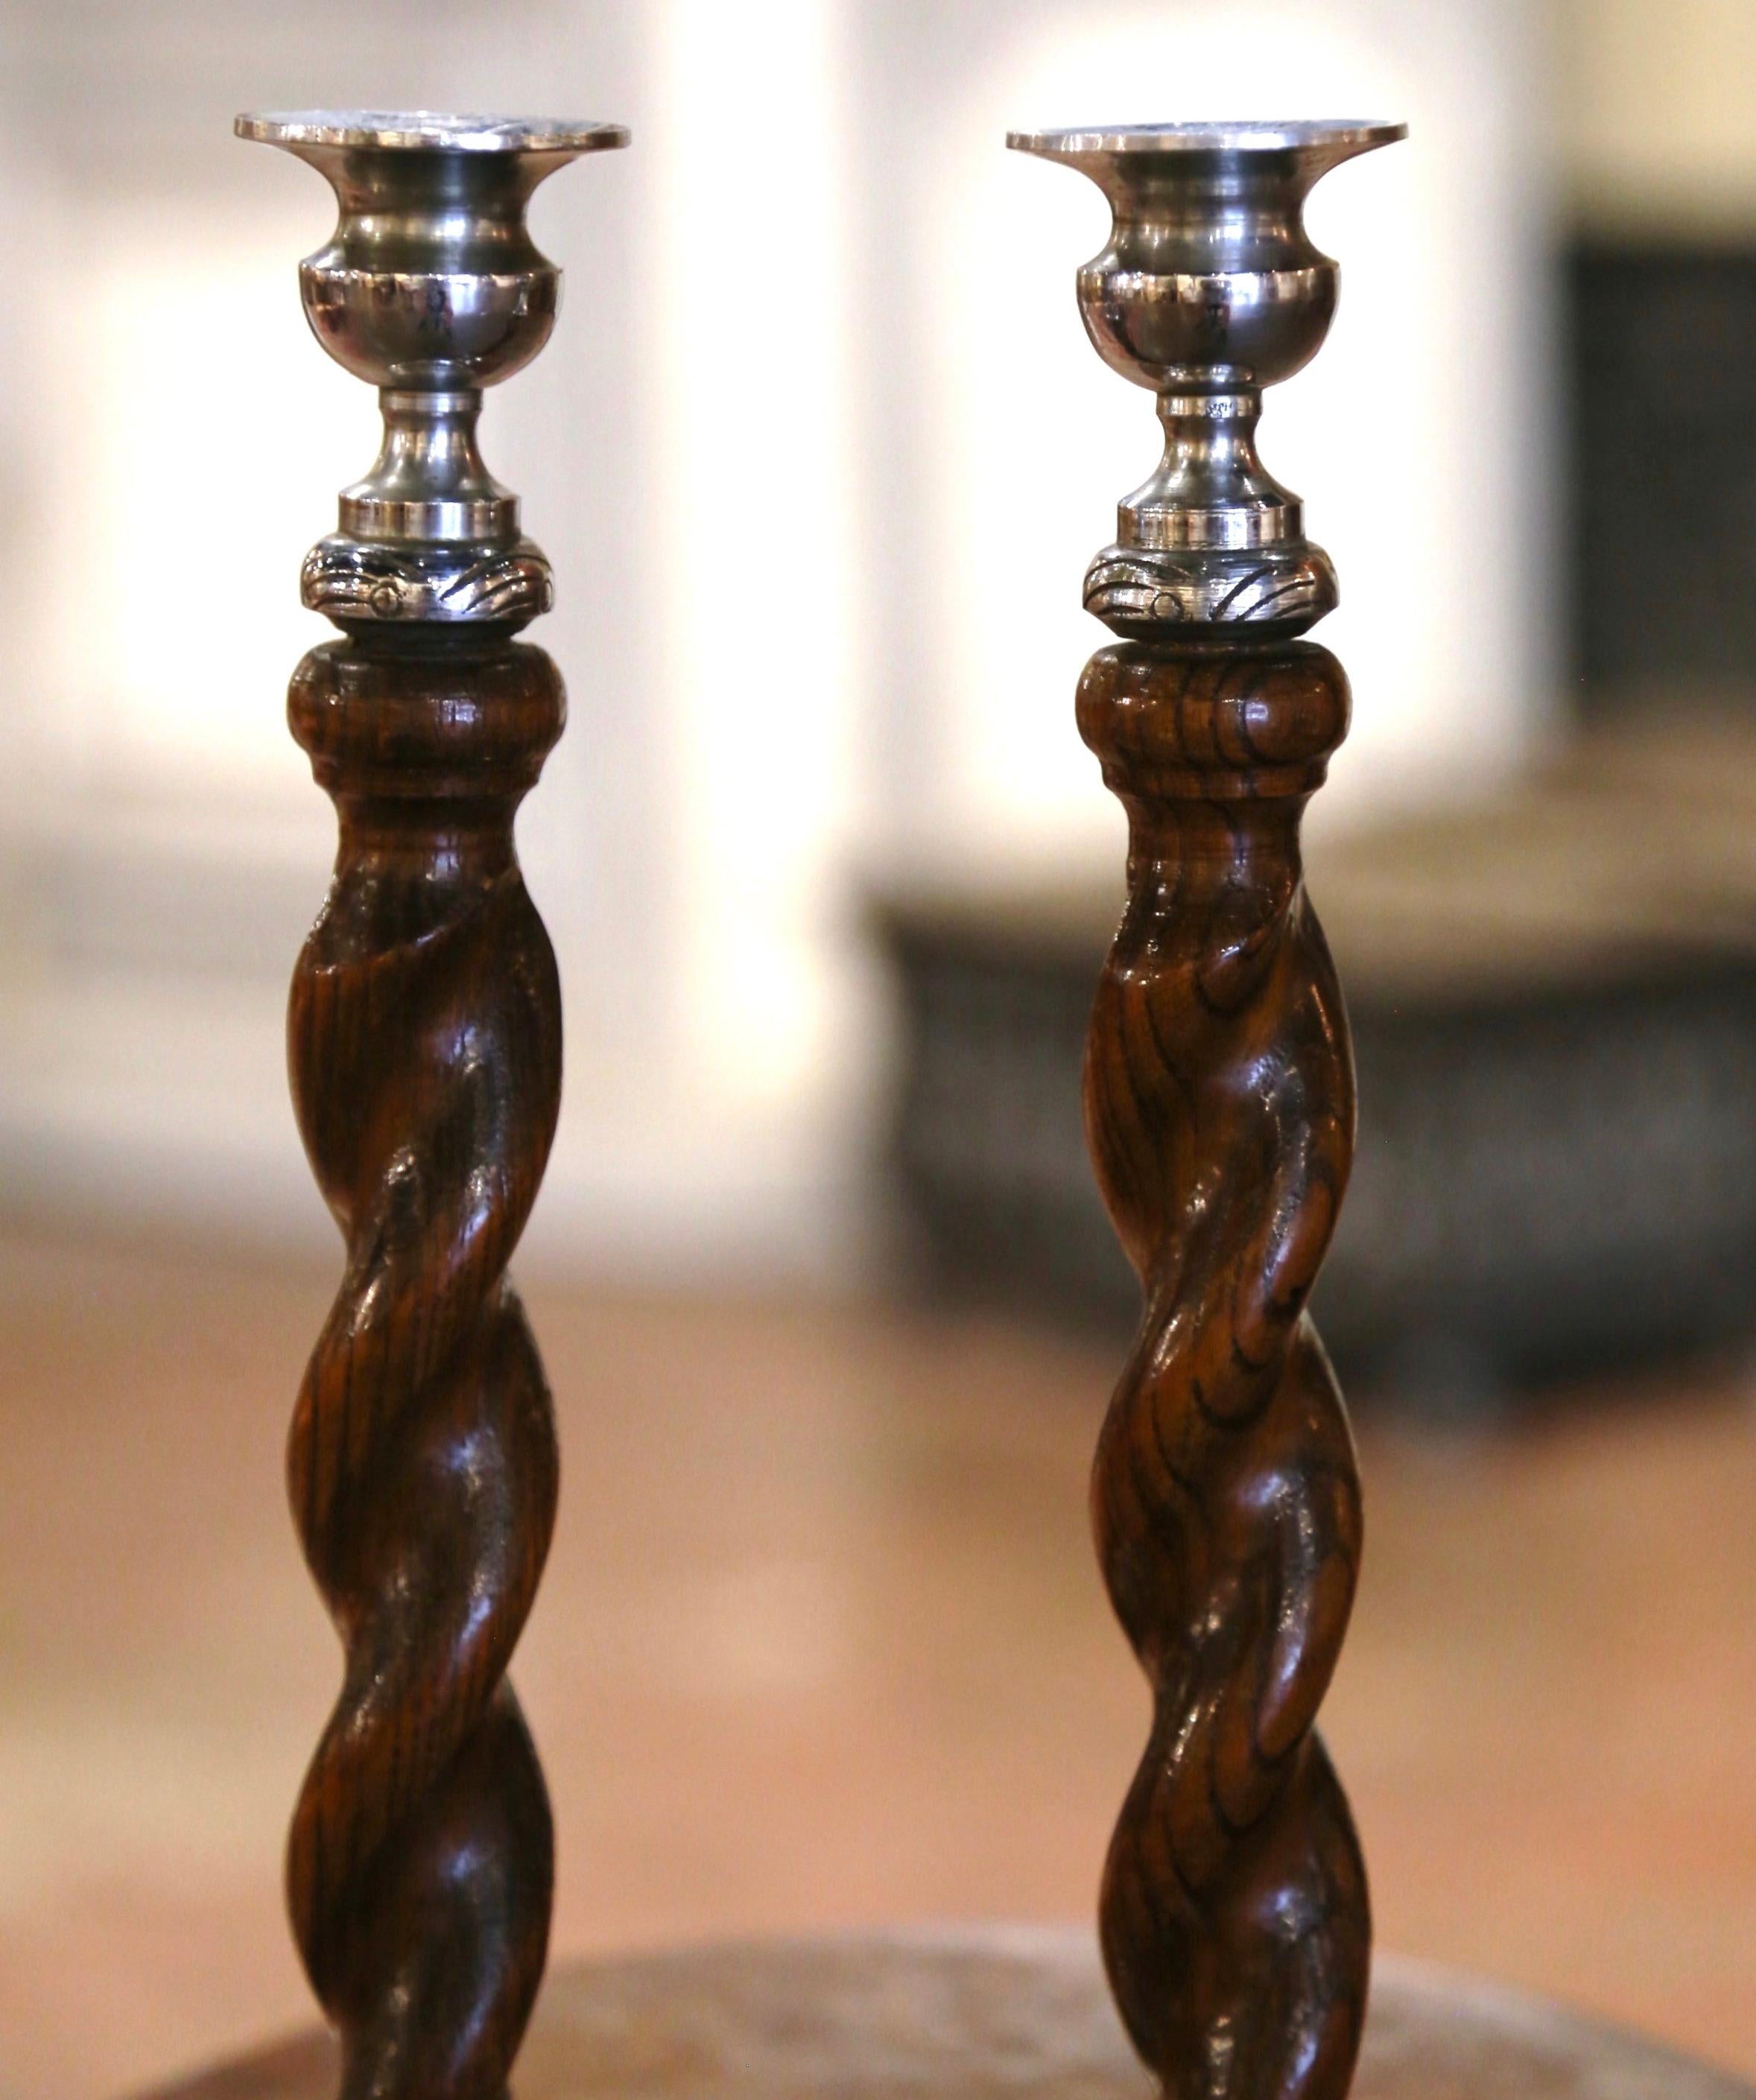 Victorian 1920's Pair of English Carved Oak and Silverplated Barley Twist Candlesticks 